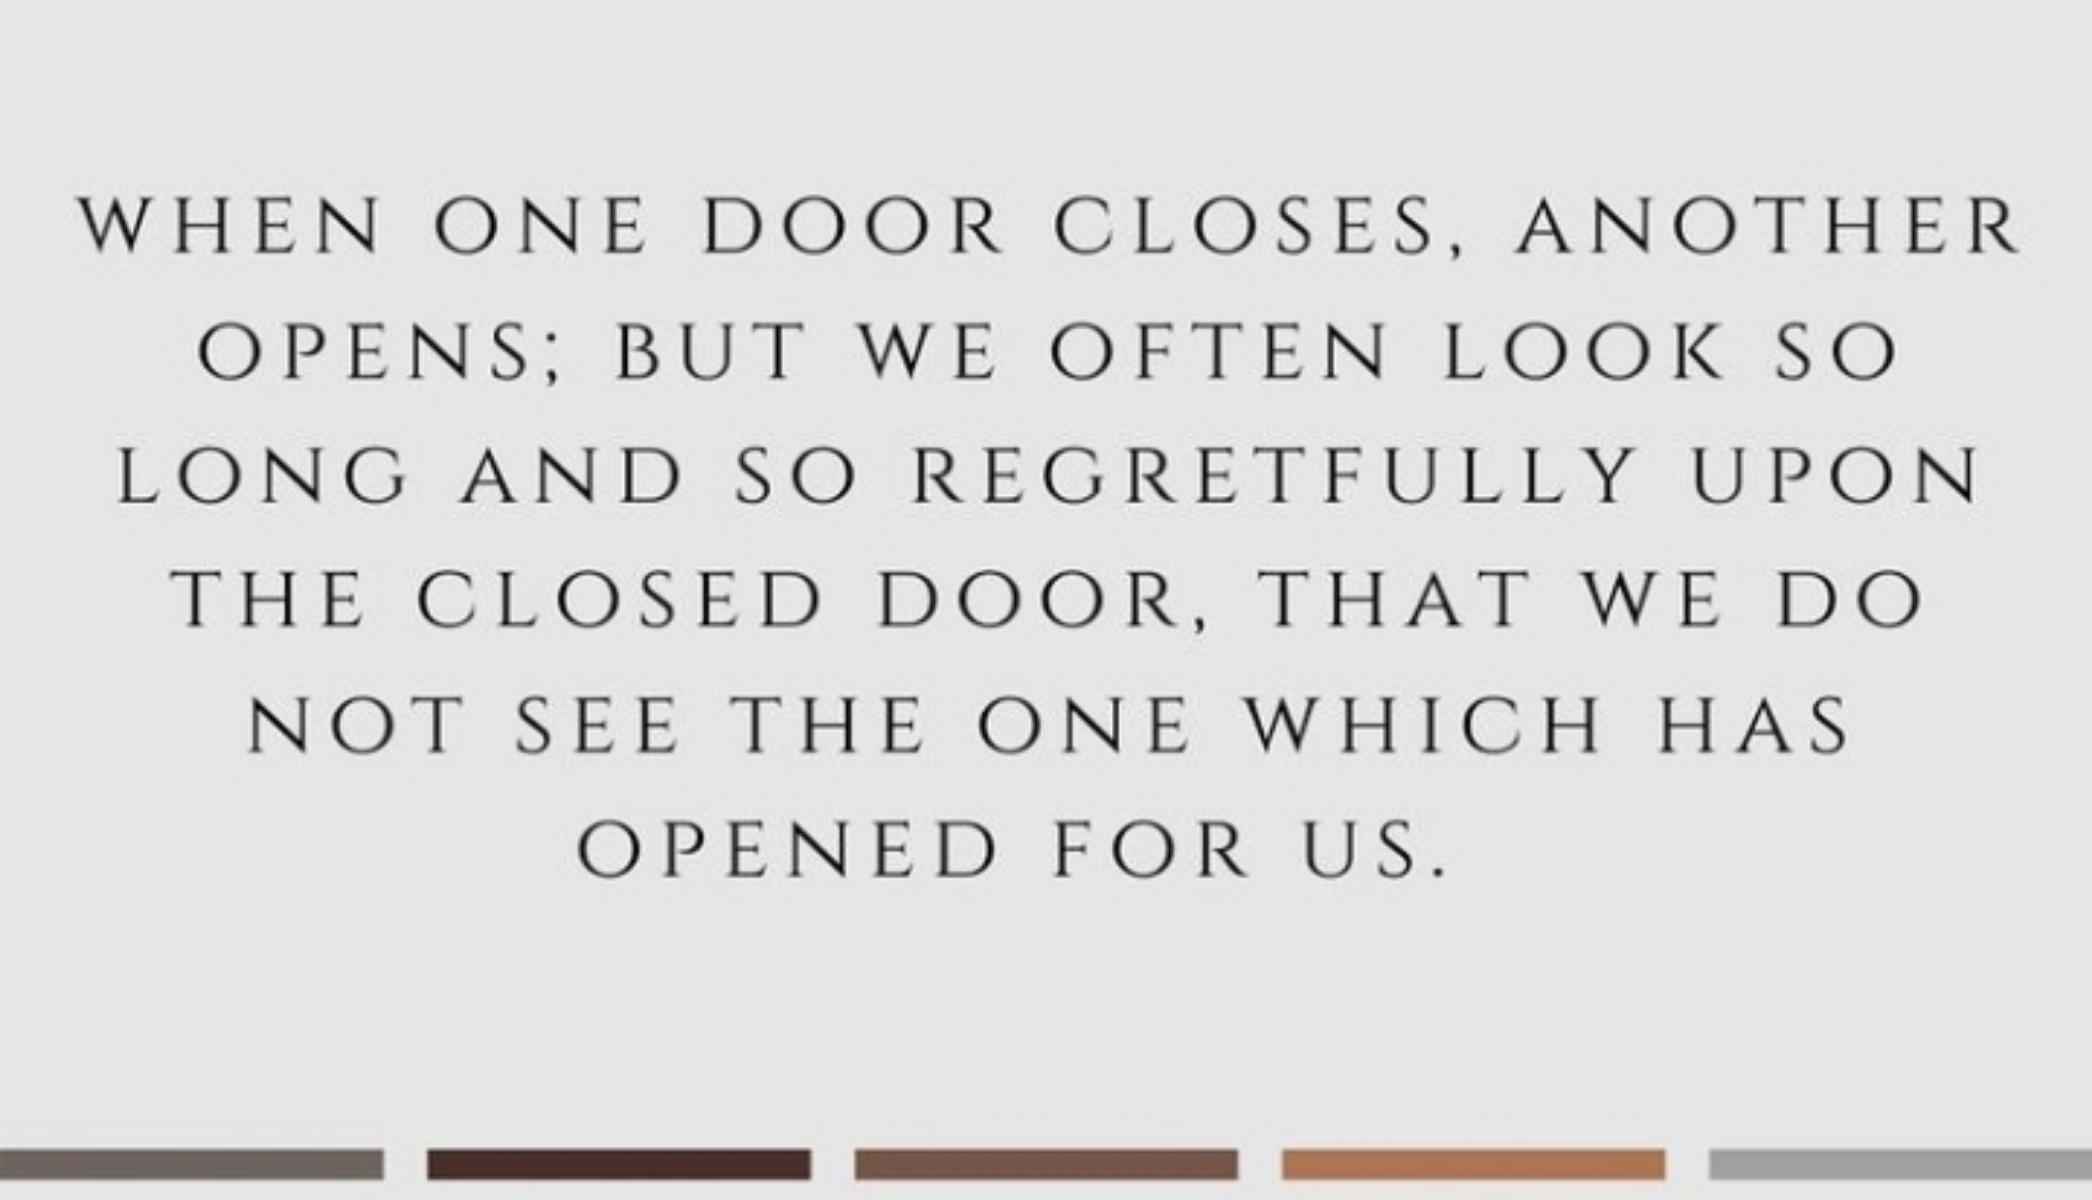 The One Door Is Opened And Another Is Closed 